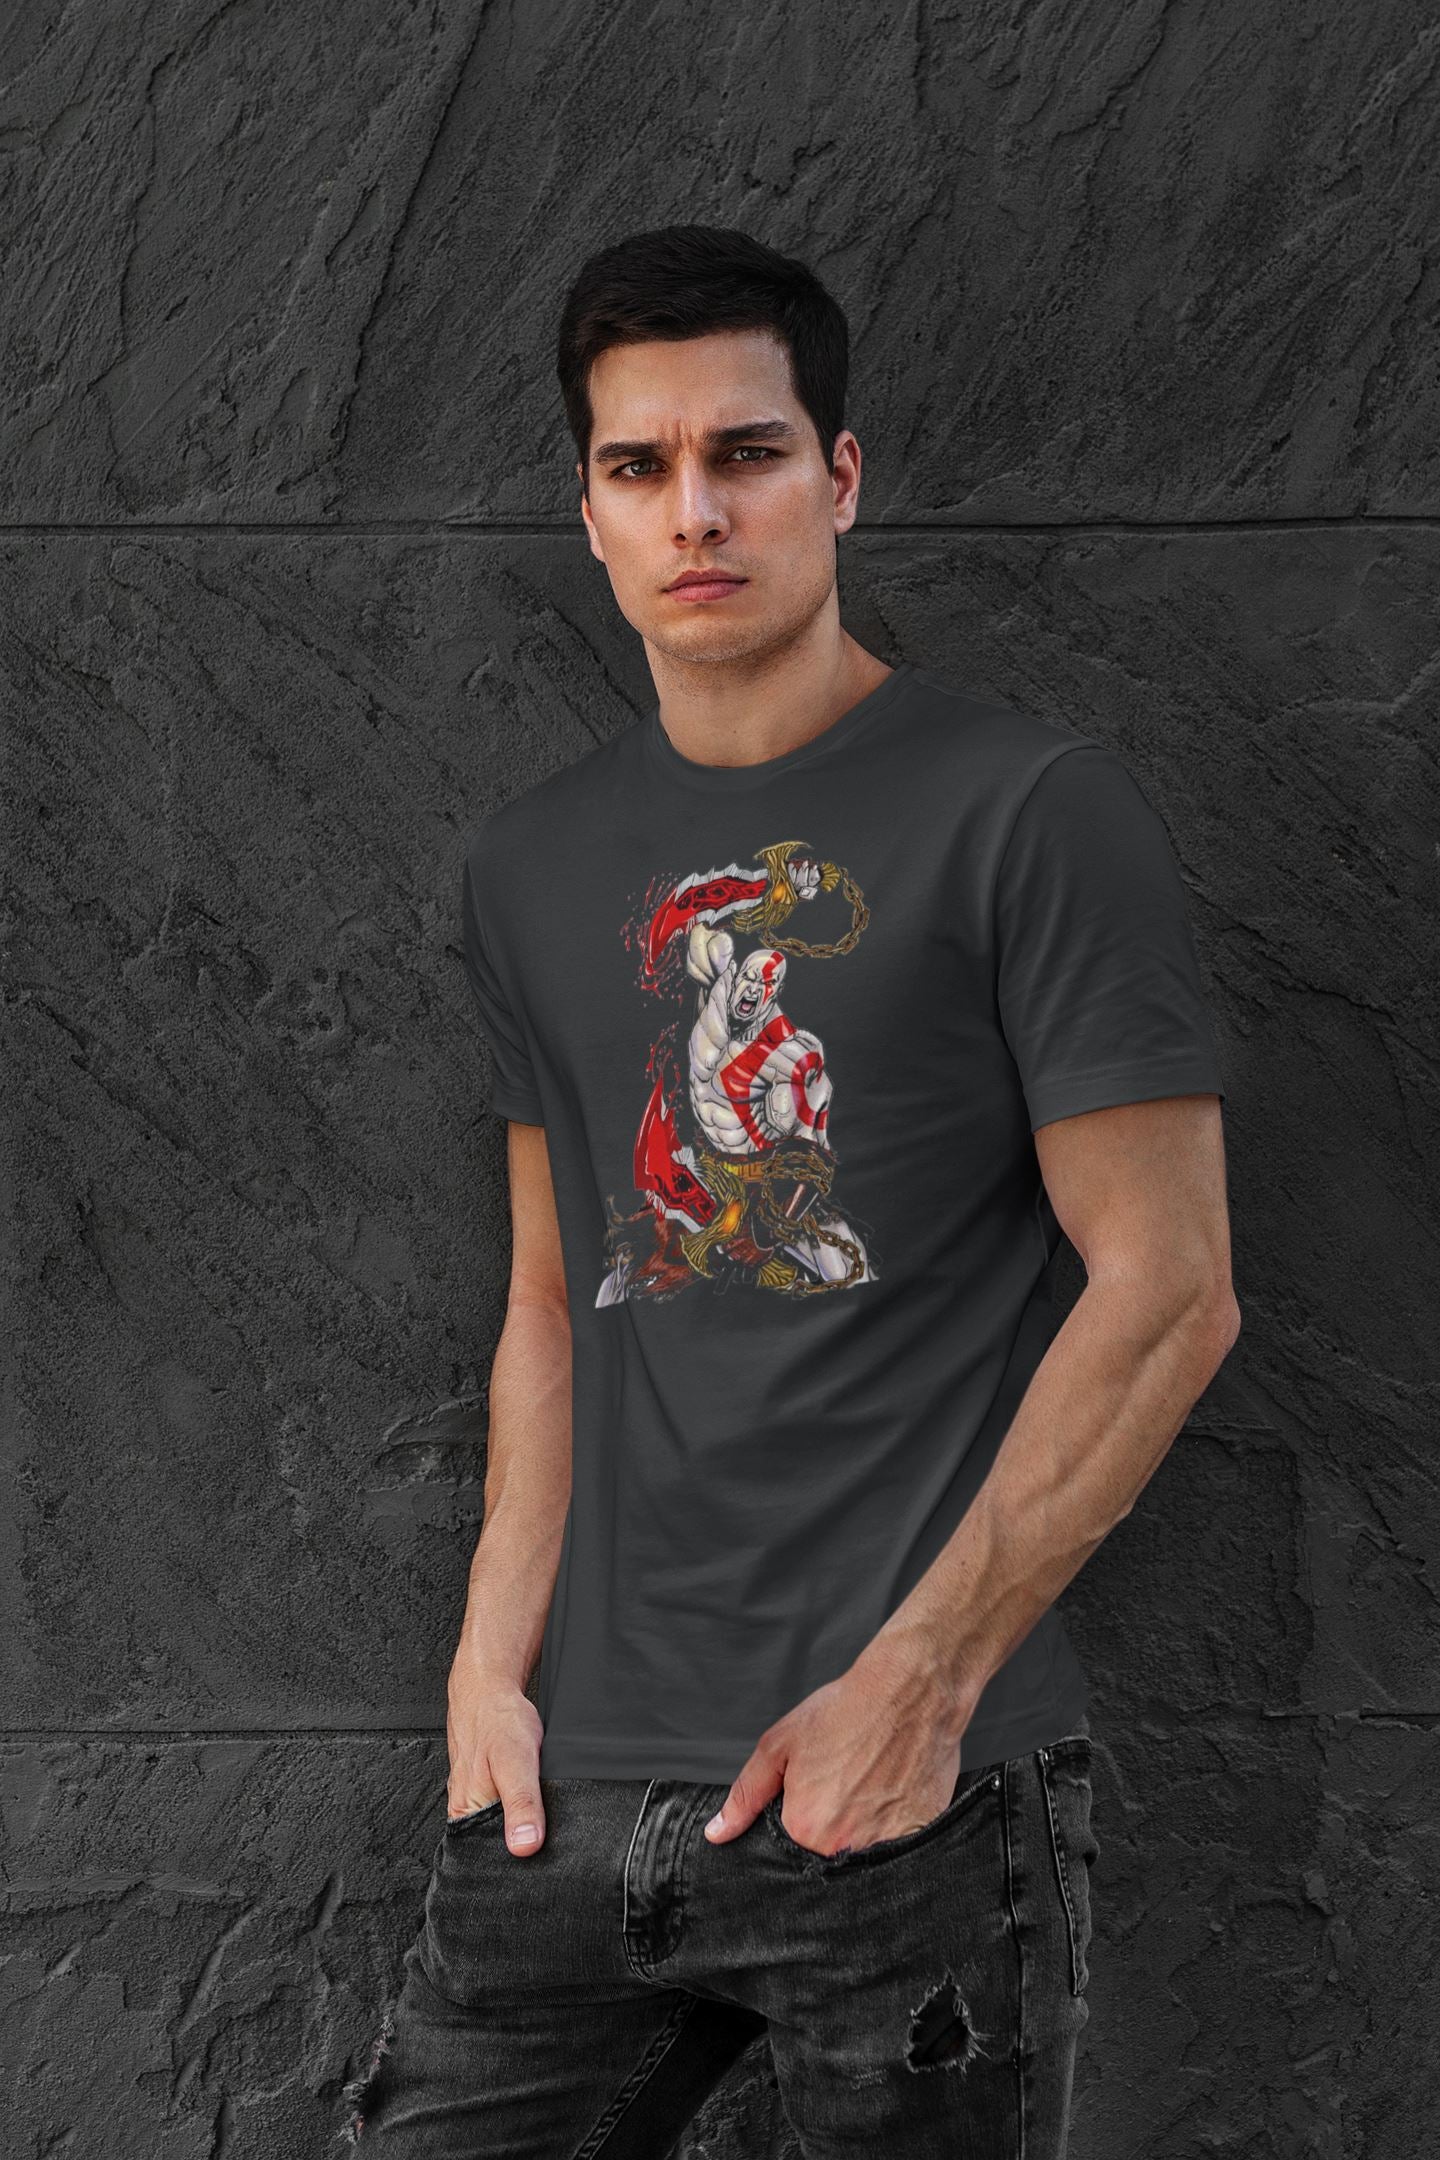 Kratos with the Blades of Chaos Official God of War Black T Shirt for Men and Women freeshipping - Catch My Drift India